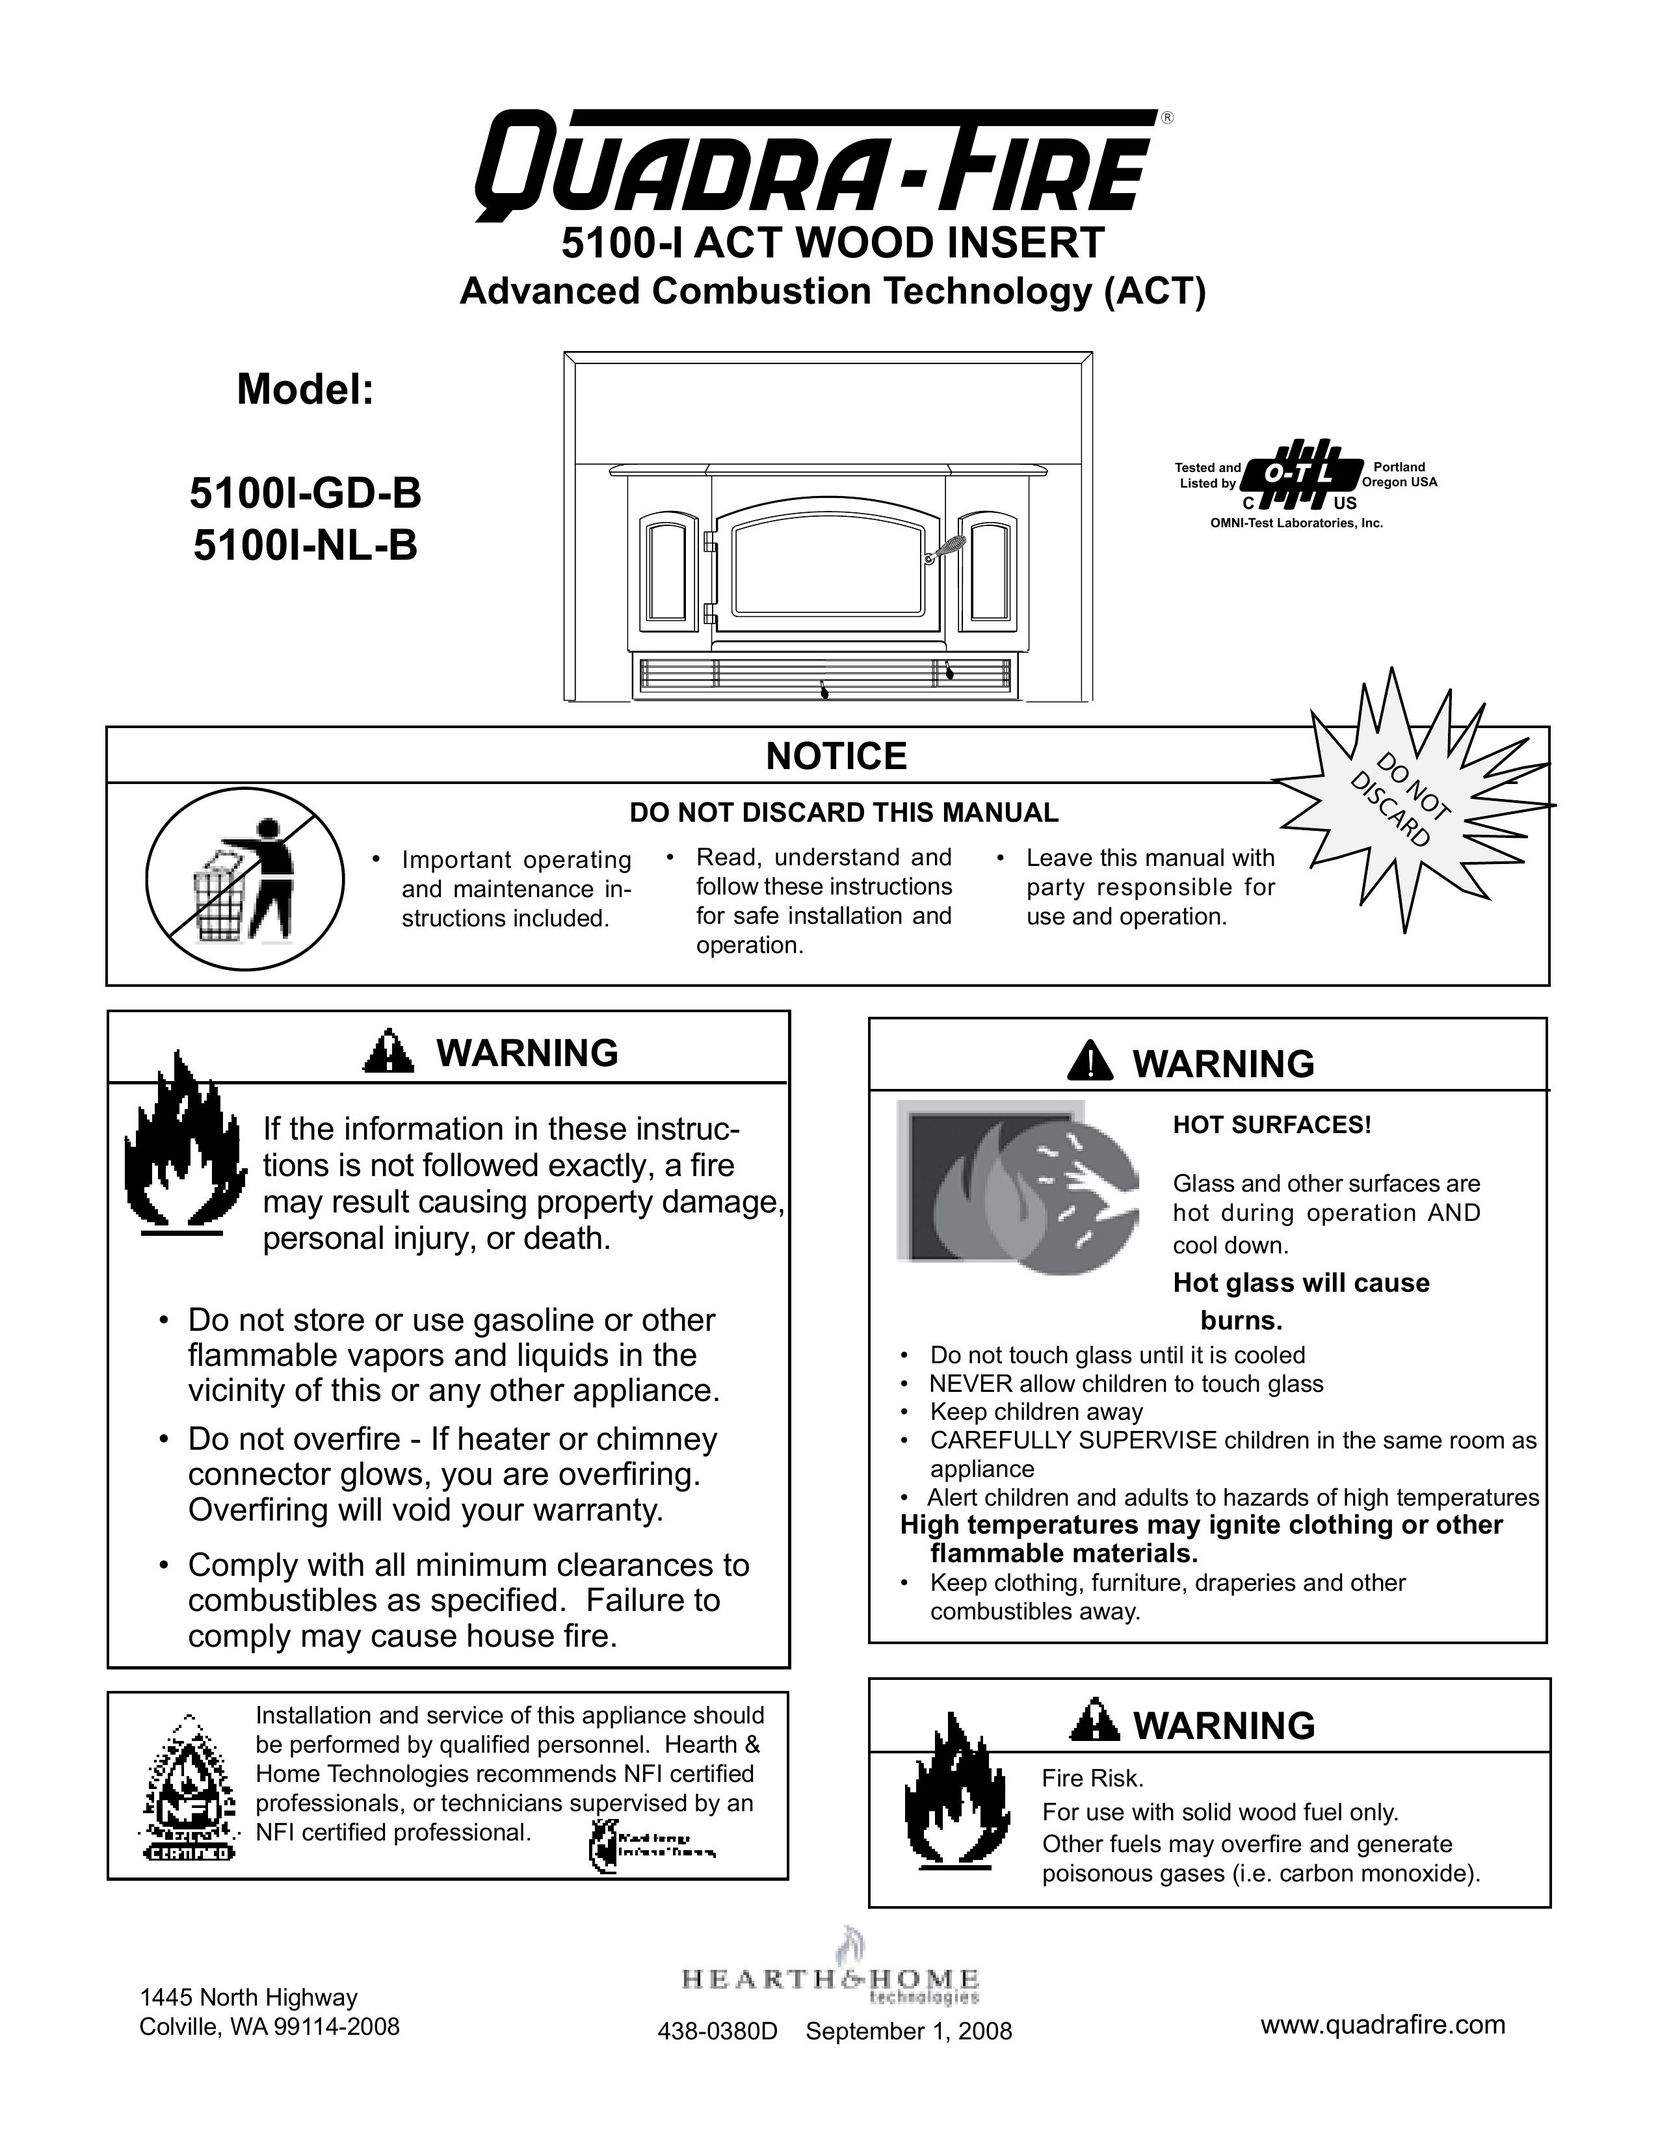 Hearth and Home Technologies 5100I-NL-B Indoor Fireplace User Manual